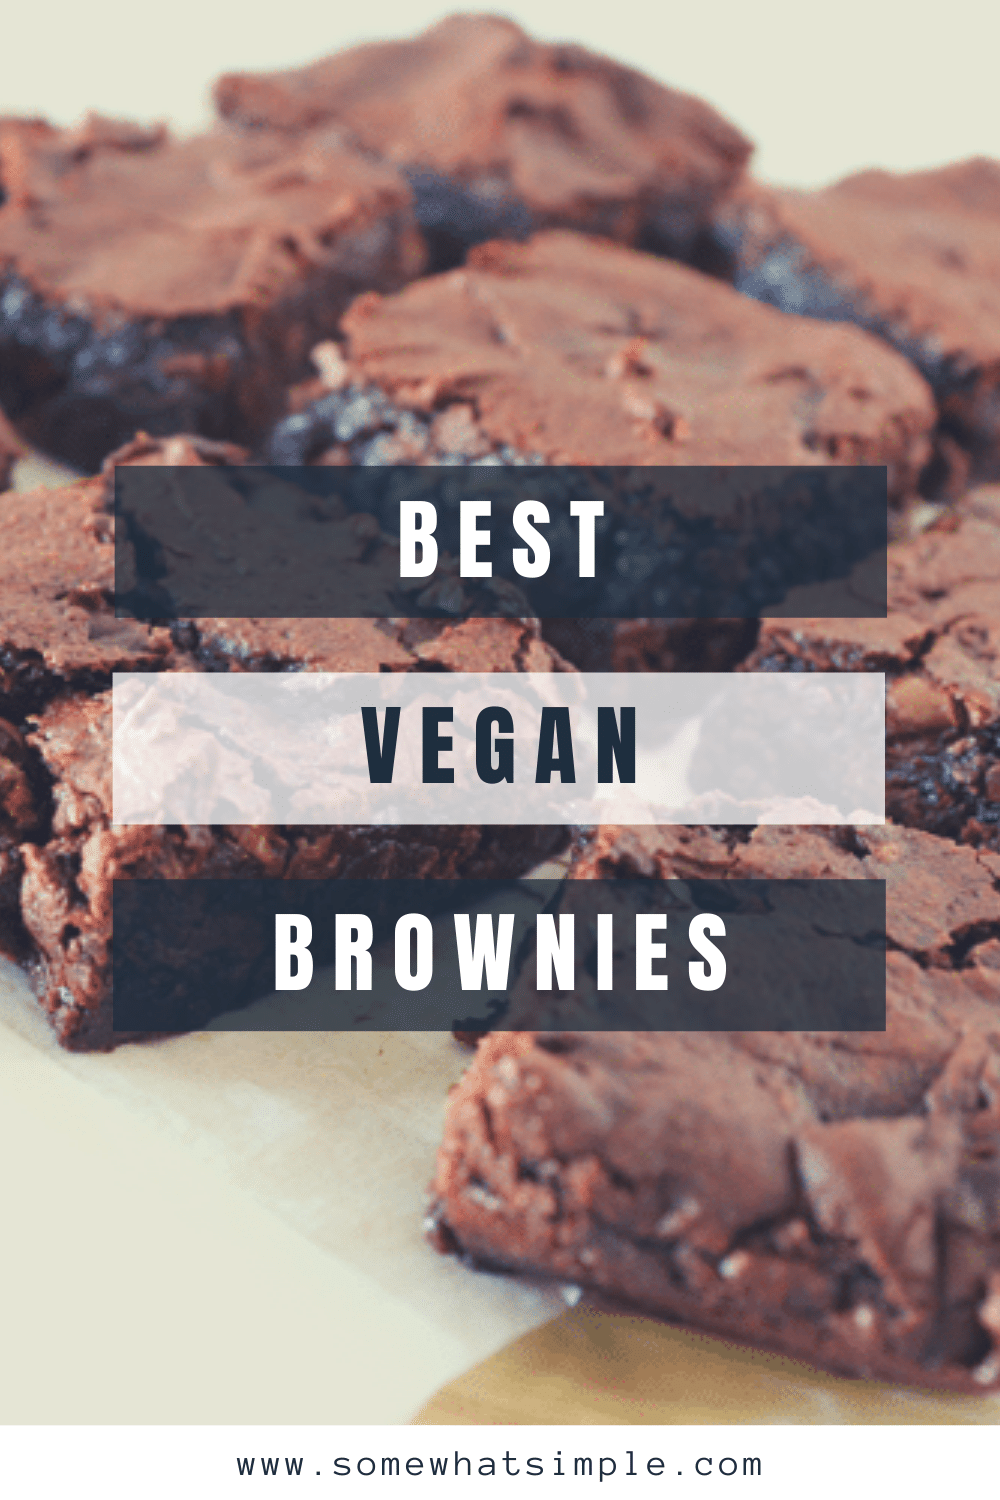 These are hands-down the best vegan brownies you'll ever eat. This recipe is made without eggs or dairy. The vegan brownies turn out fudgy and rich every time and are so easy to make! These taste so good, you'll never know they were healthier. via @somewhatsimple